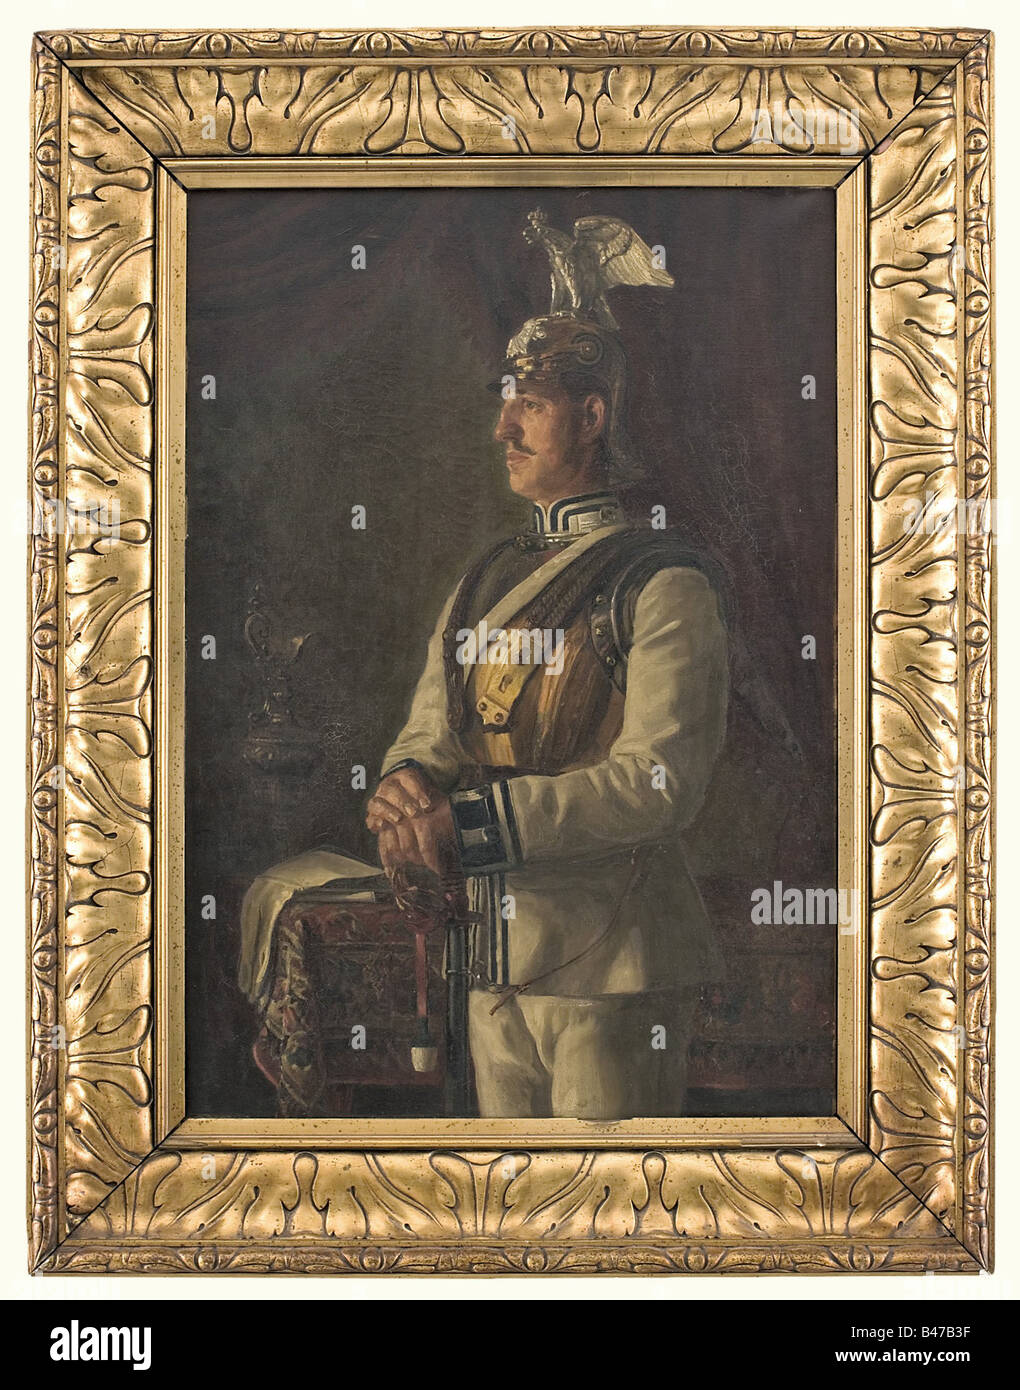 Otto Friederich, a three-quarter portrait of an ensign, Prussia, Cuirassier Guards A portrait of an ensign in the Gardekürassier-Regiment, in his cuirass and helmet with parade eagle. Oil on canvas. Picture dimensions: 55 x 80 cm., signed 'O. Friederich 1907' on the left. Old, wide, gold plaster frame. Dimensions 80 x 106 cm. Otto Friederich (*1862 Raab, Hungary) studied at the Vienna and Munich Academies under Eisenmenger and Lindenschmit, principal founder of the Viennese Secession. He painted numerous portraits (See Thieme-Becker, vol. XII. P. 473). people, , Stock Photo